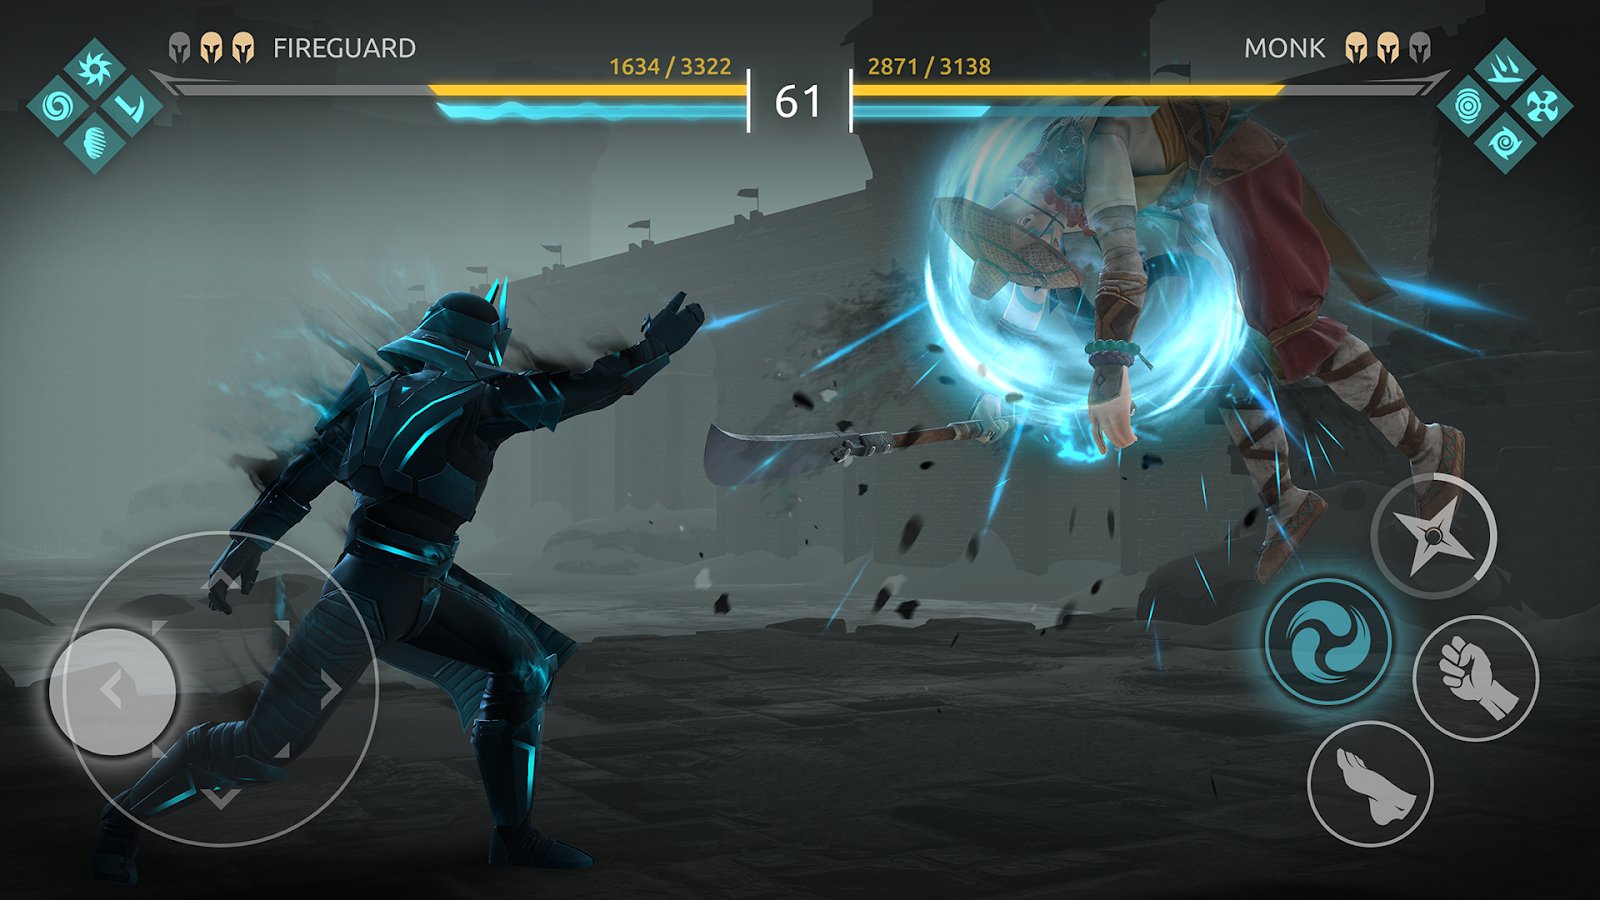 free download arena shadow fight 4